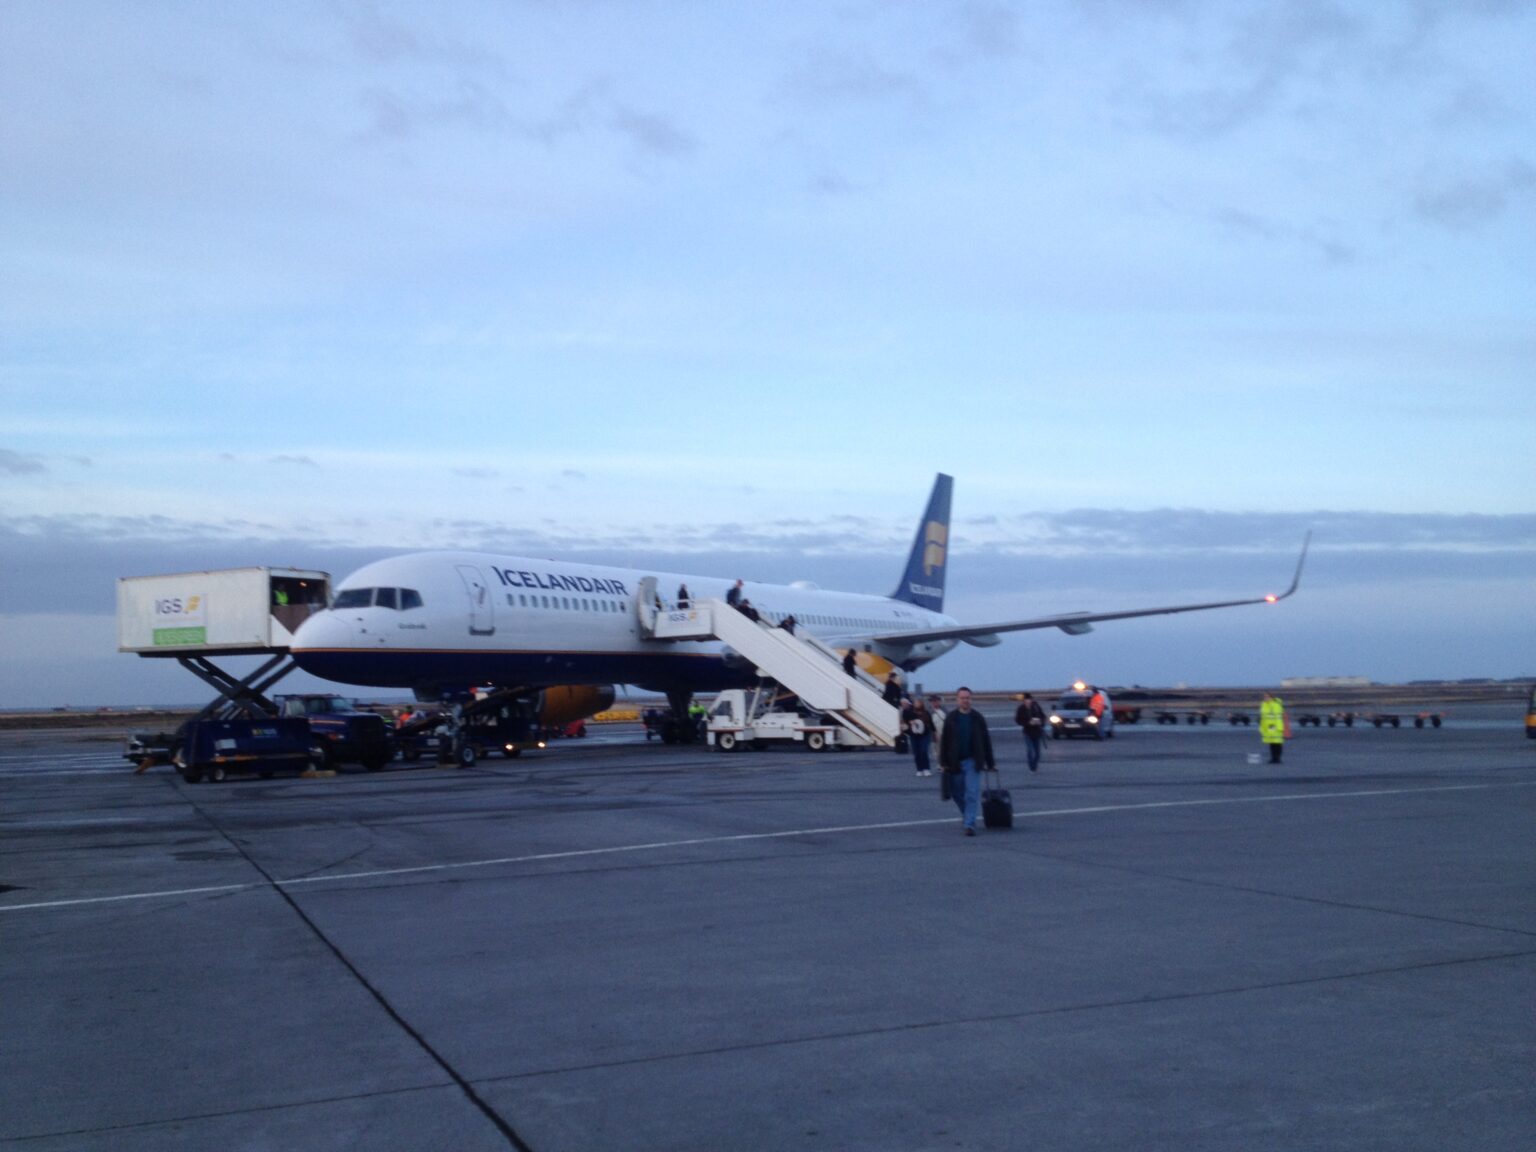 Arriving in Iceland